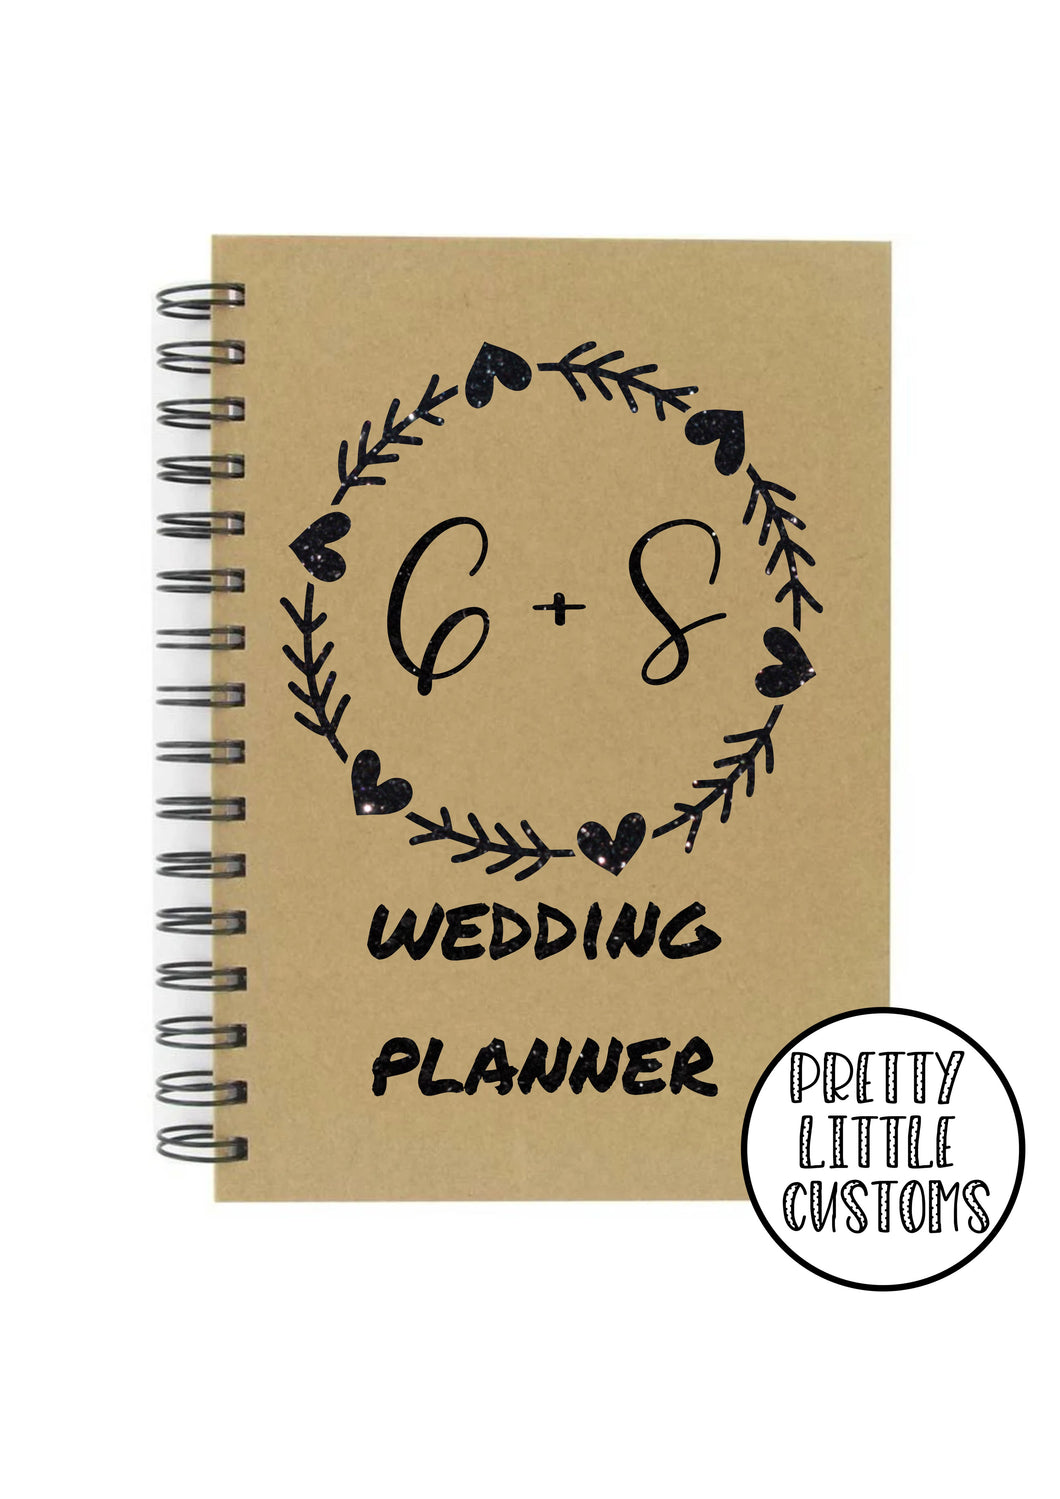 Personalised glitter print wedding planner a5 notebook - your initials